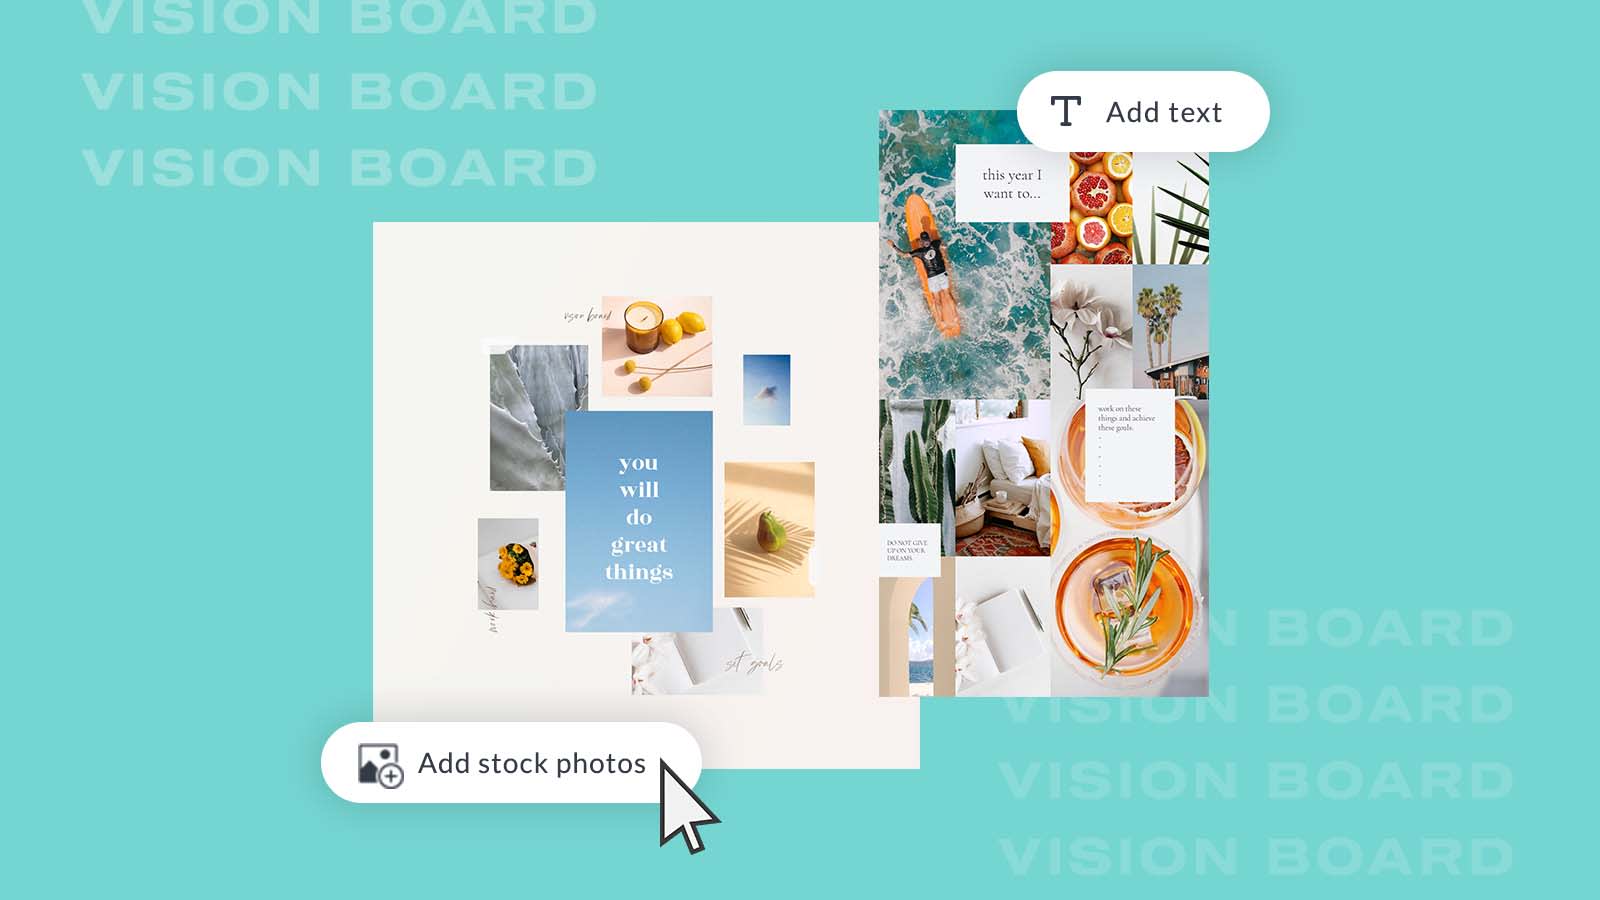 How a Vision Board can help you accomplish your Goals